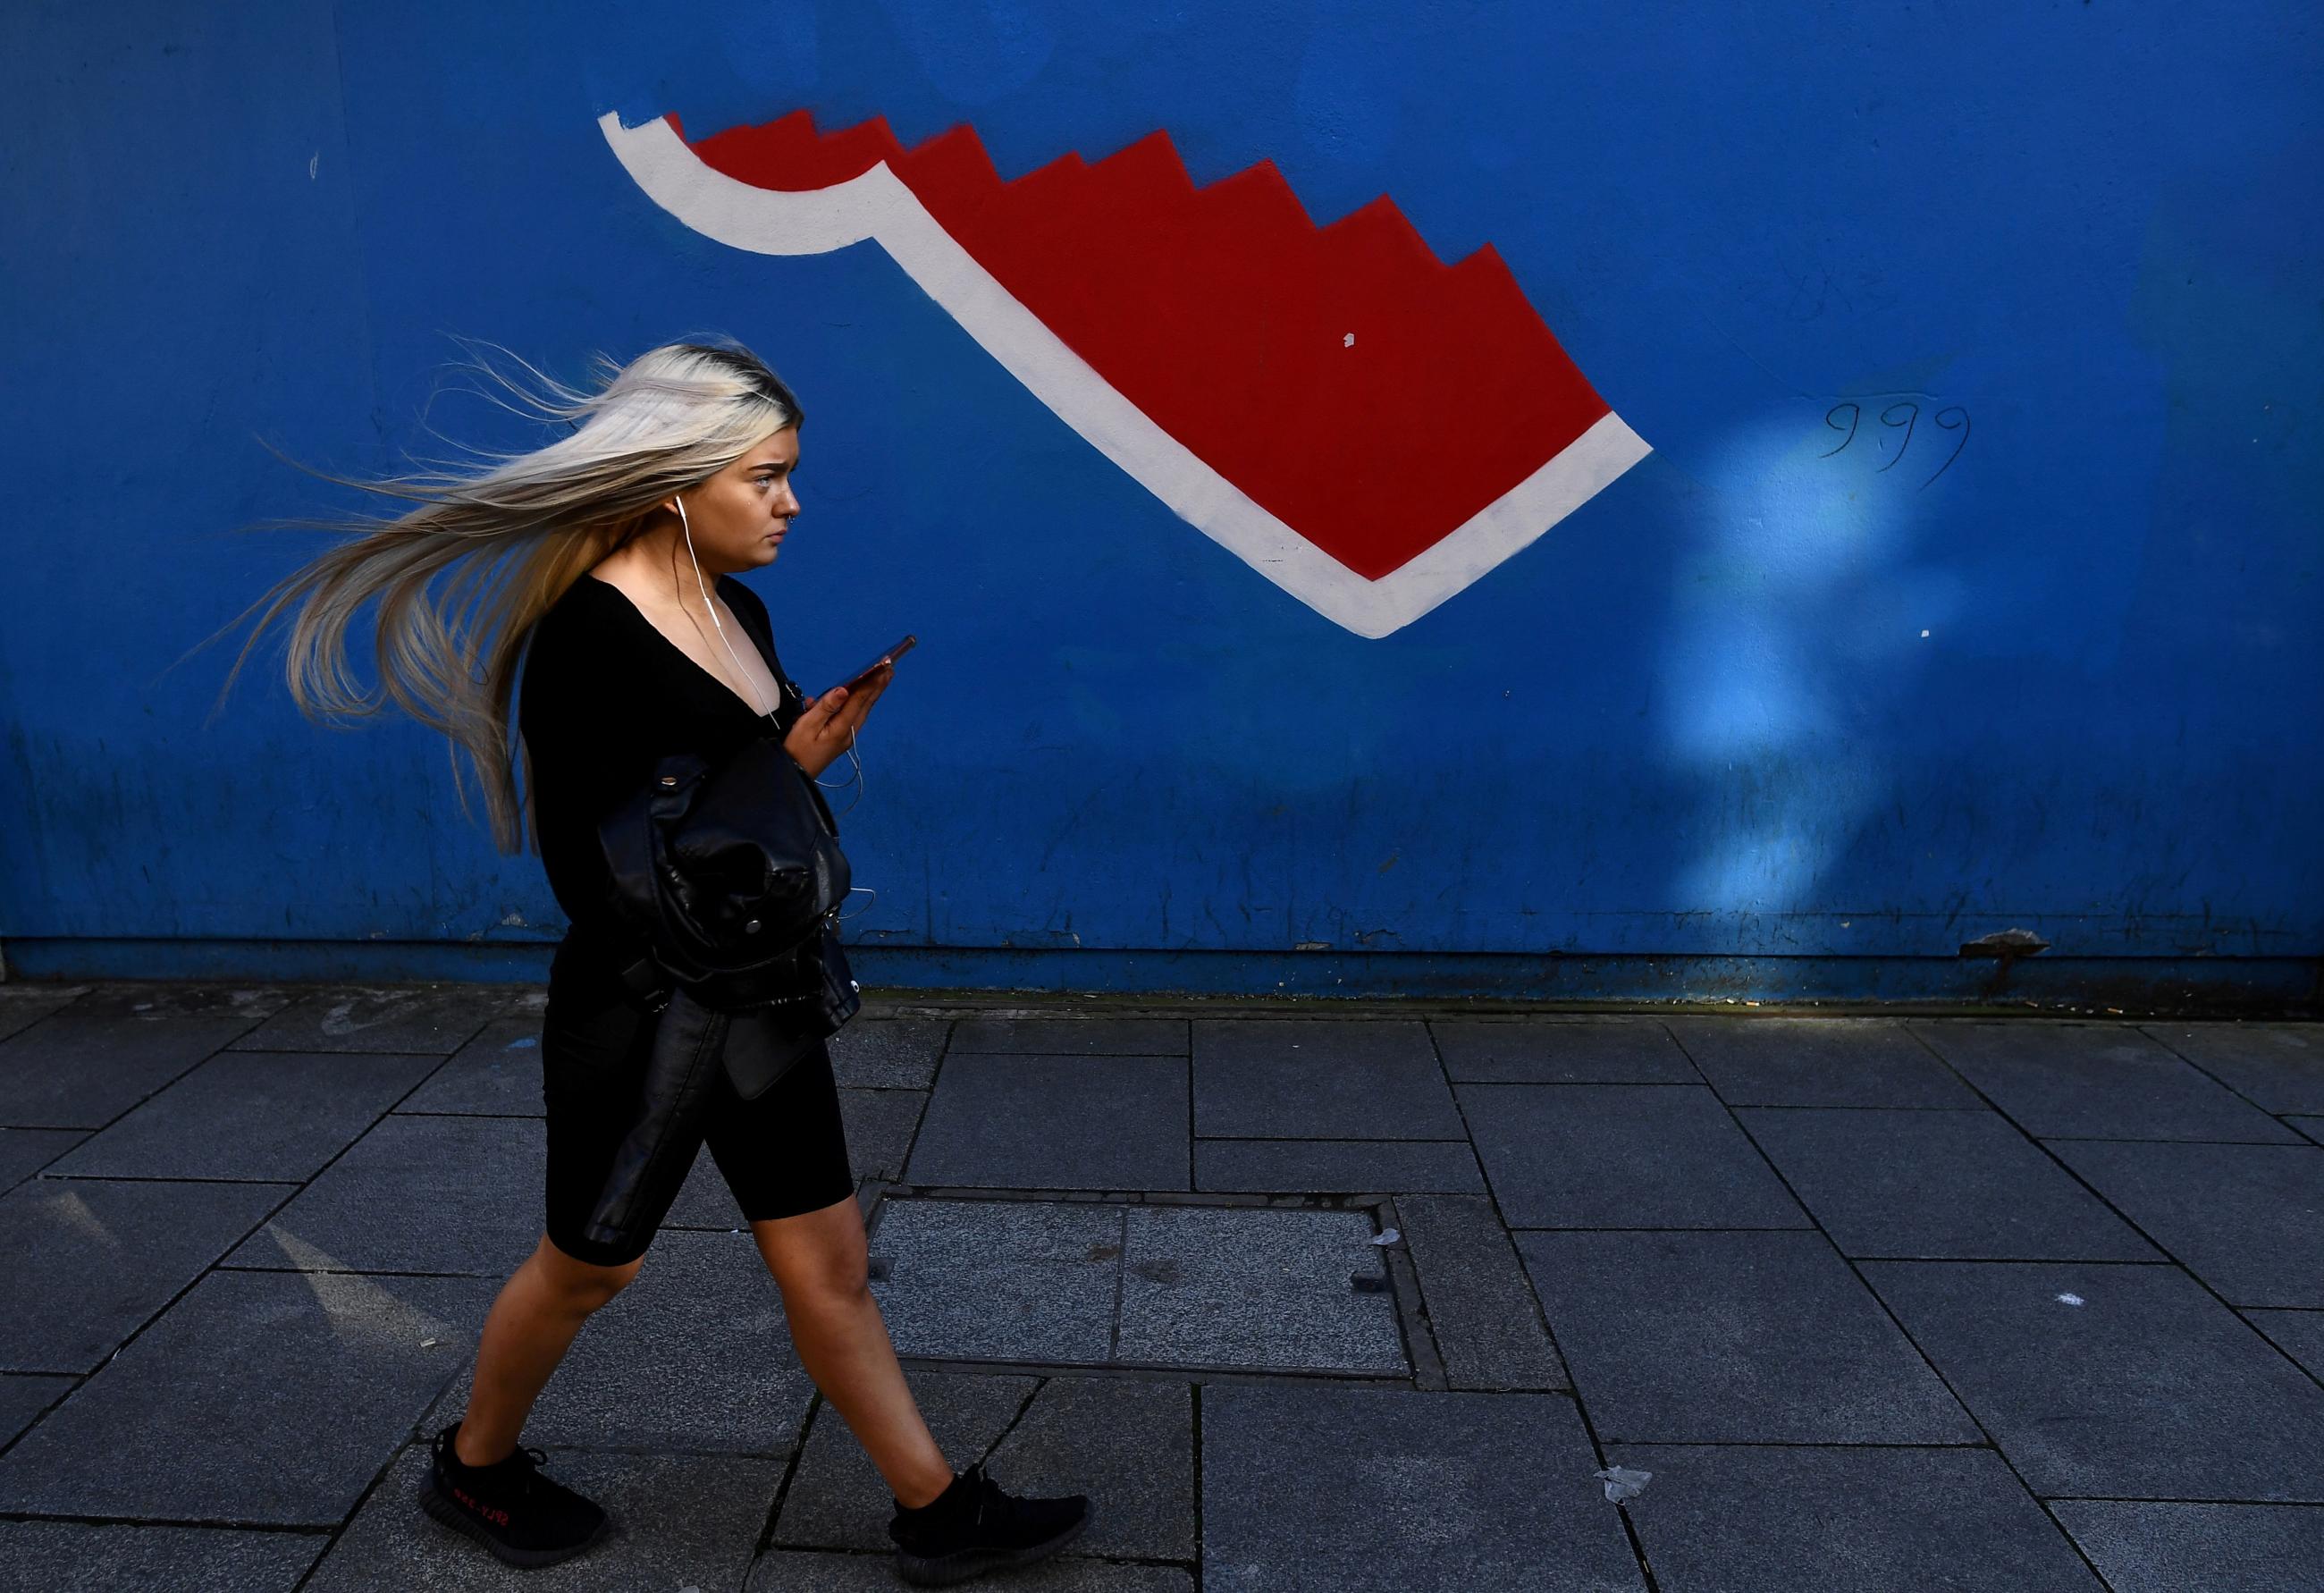 A woman walks past the remains of a blue and red abortion rights mural in Dublin, Ireland on March 16, 2021.